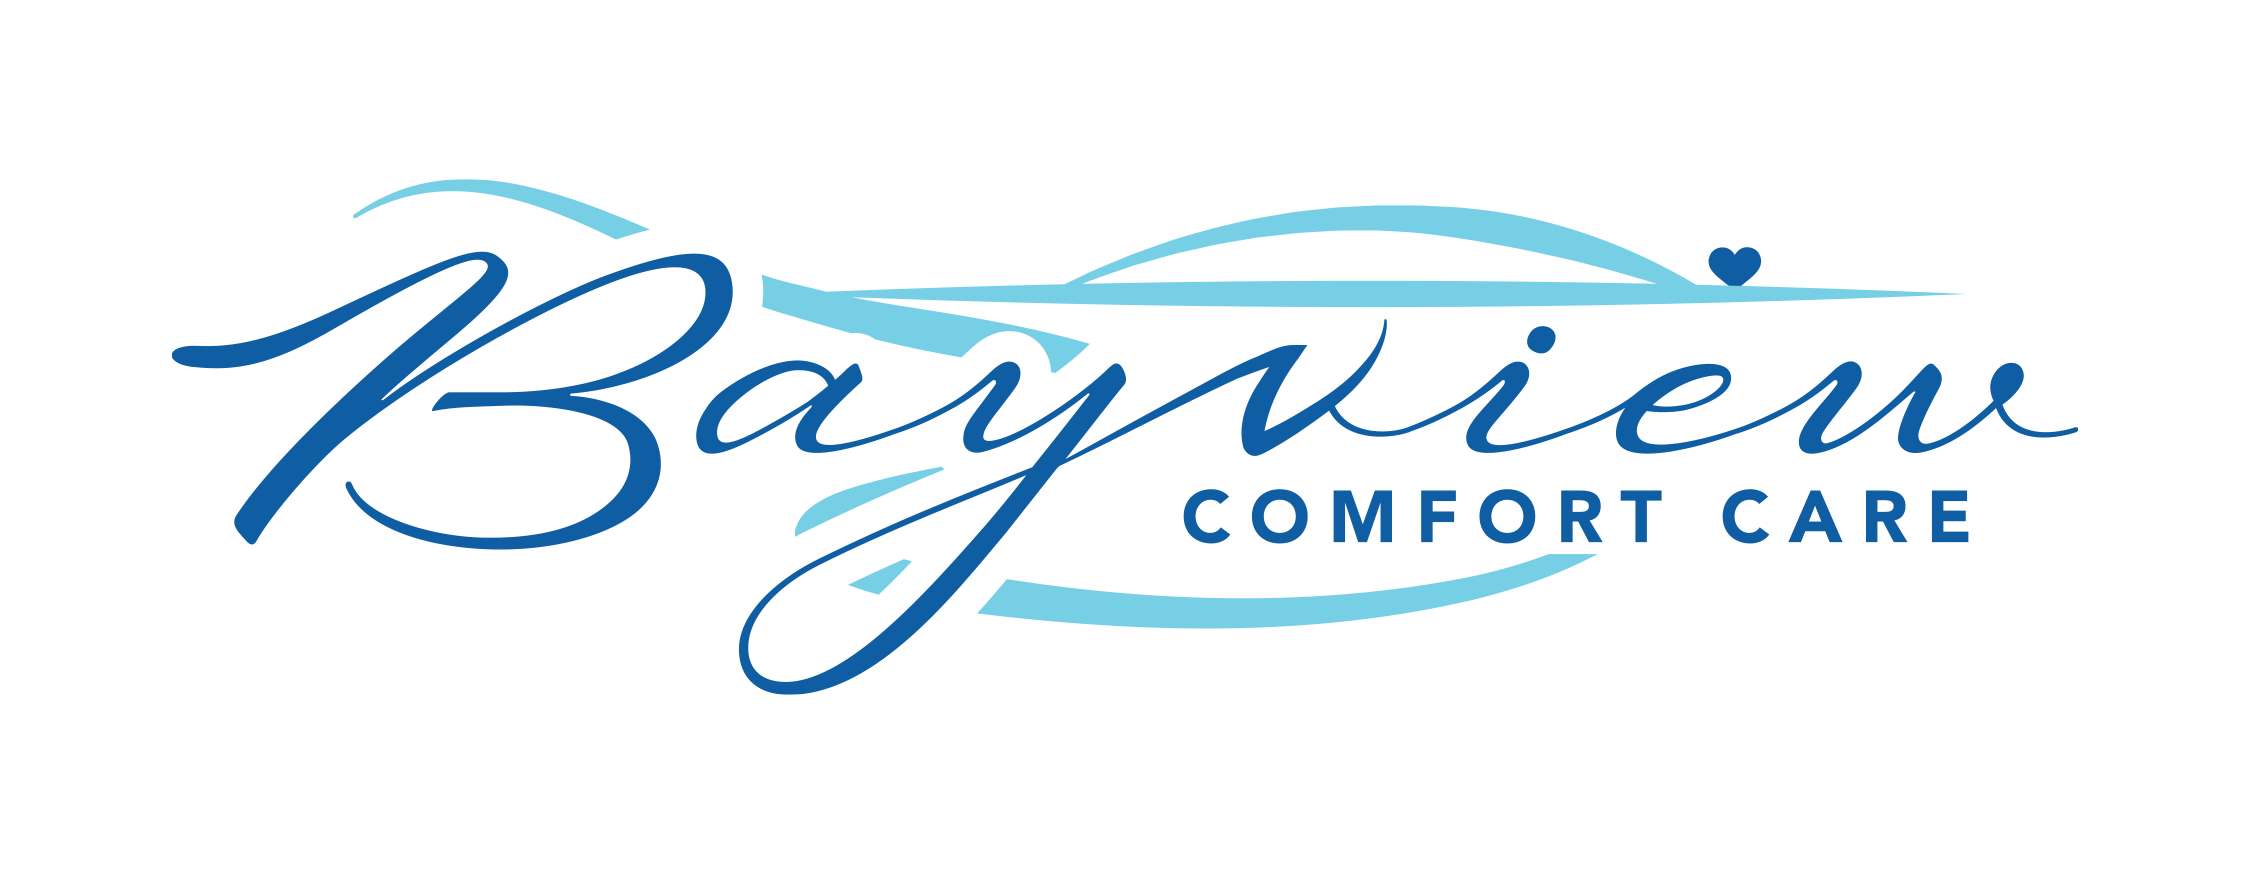 A blue and black logo for payne comfort